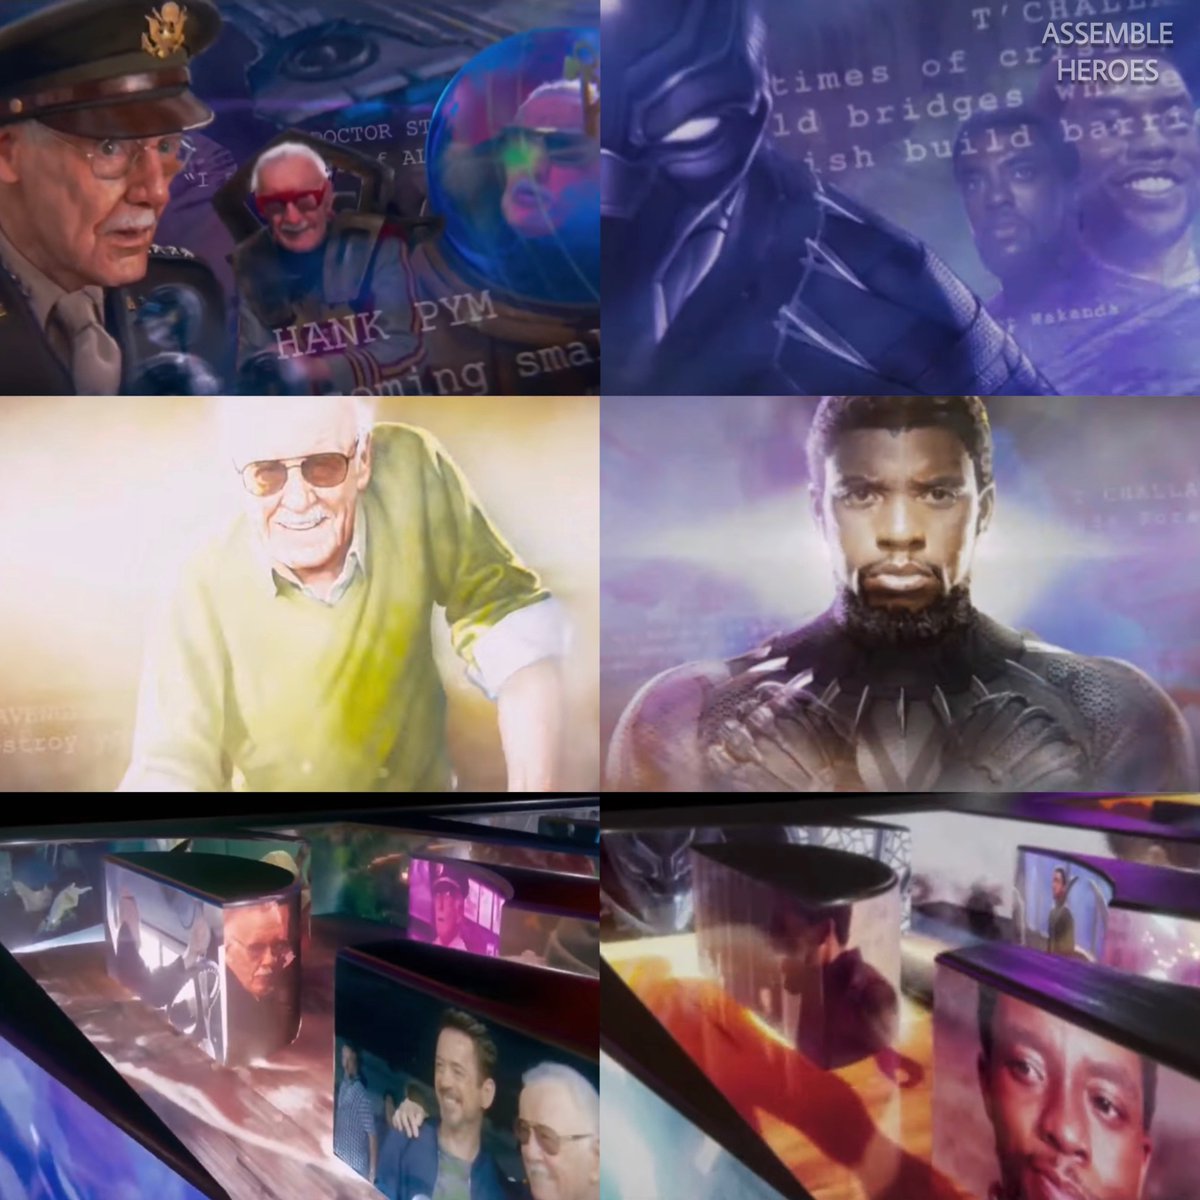 Stan Lee & Chadwick Boseman’s tribute 

#CaptainMarvel 
#BlackPantherWakandaForever https://t.co/YLxpoI8a1a